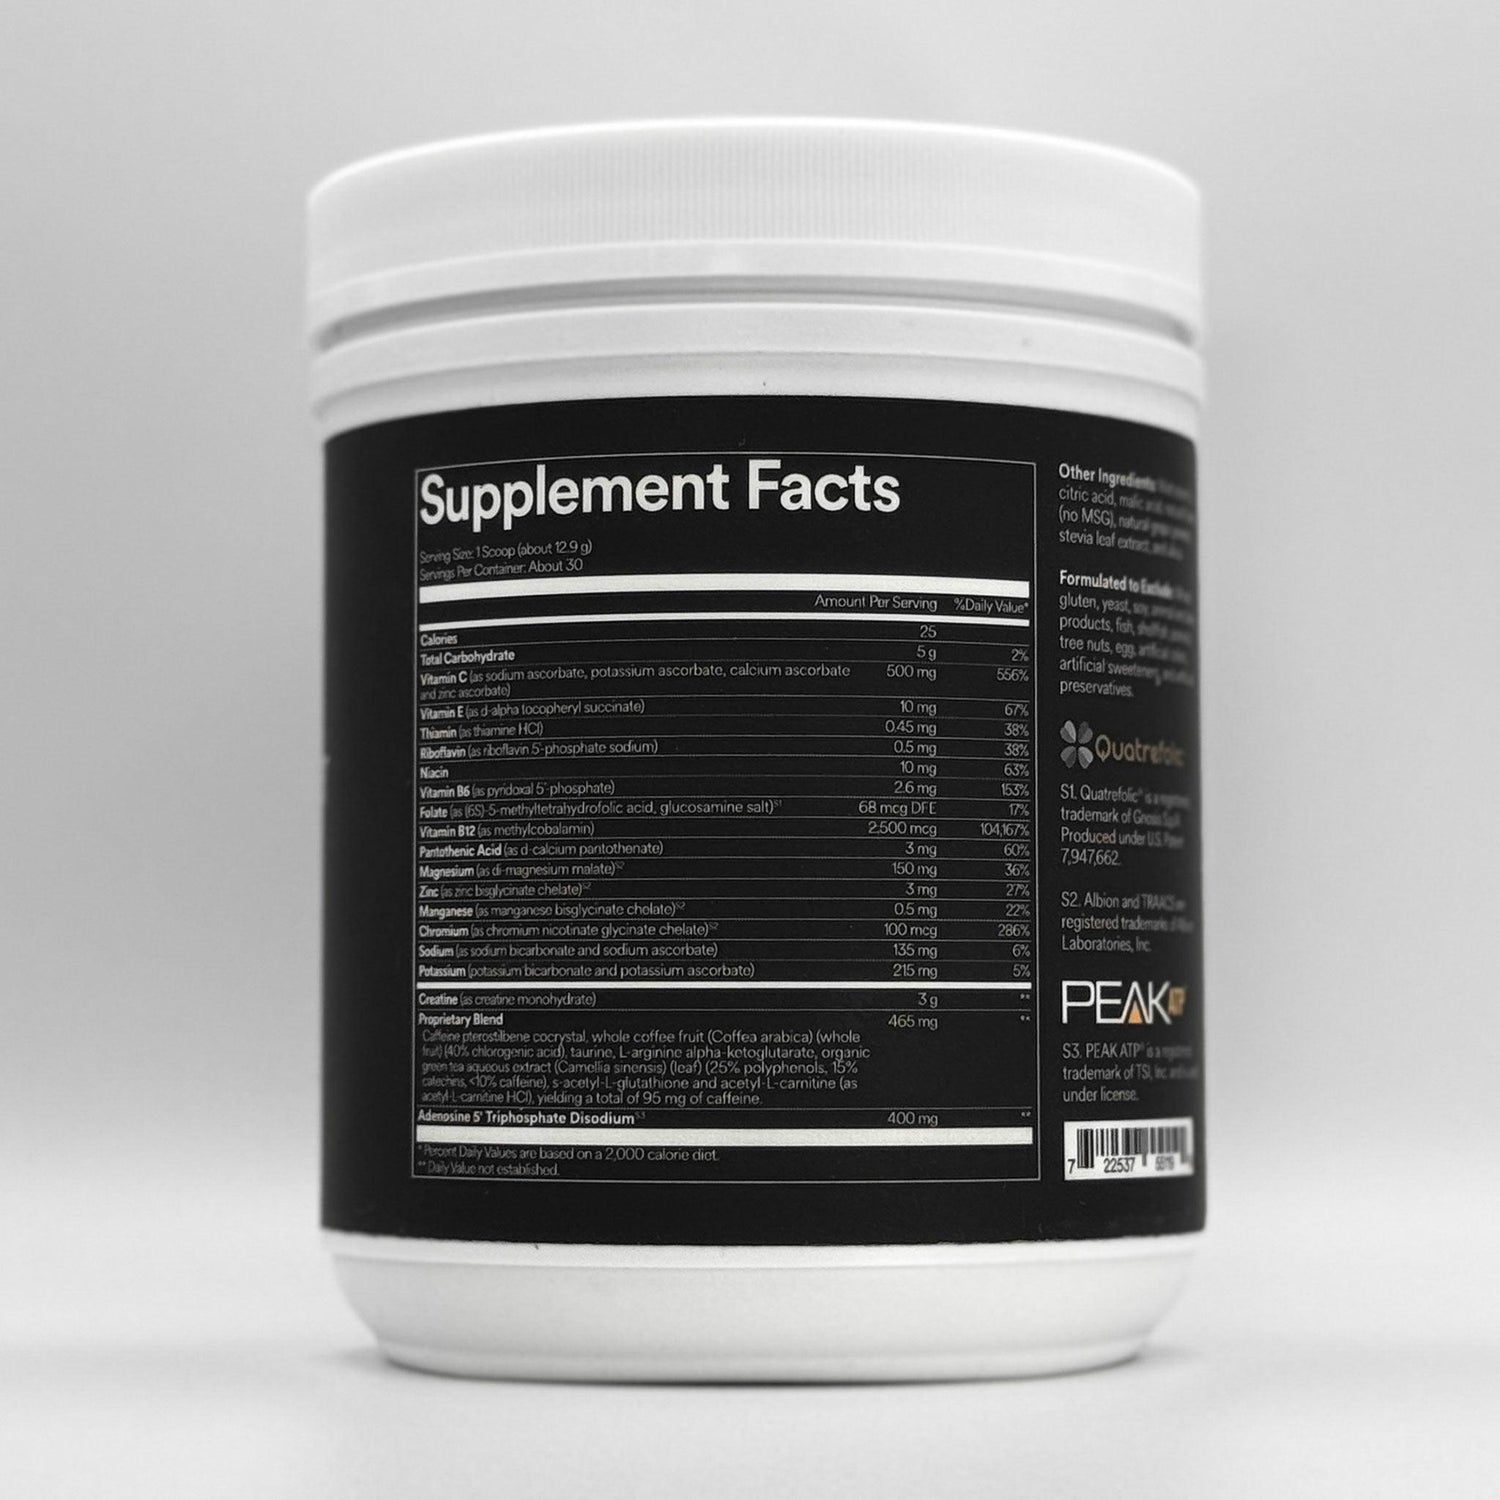 Fitties FitBoost+ supplement facts label